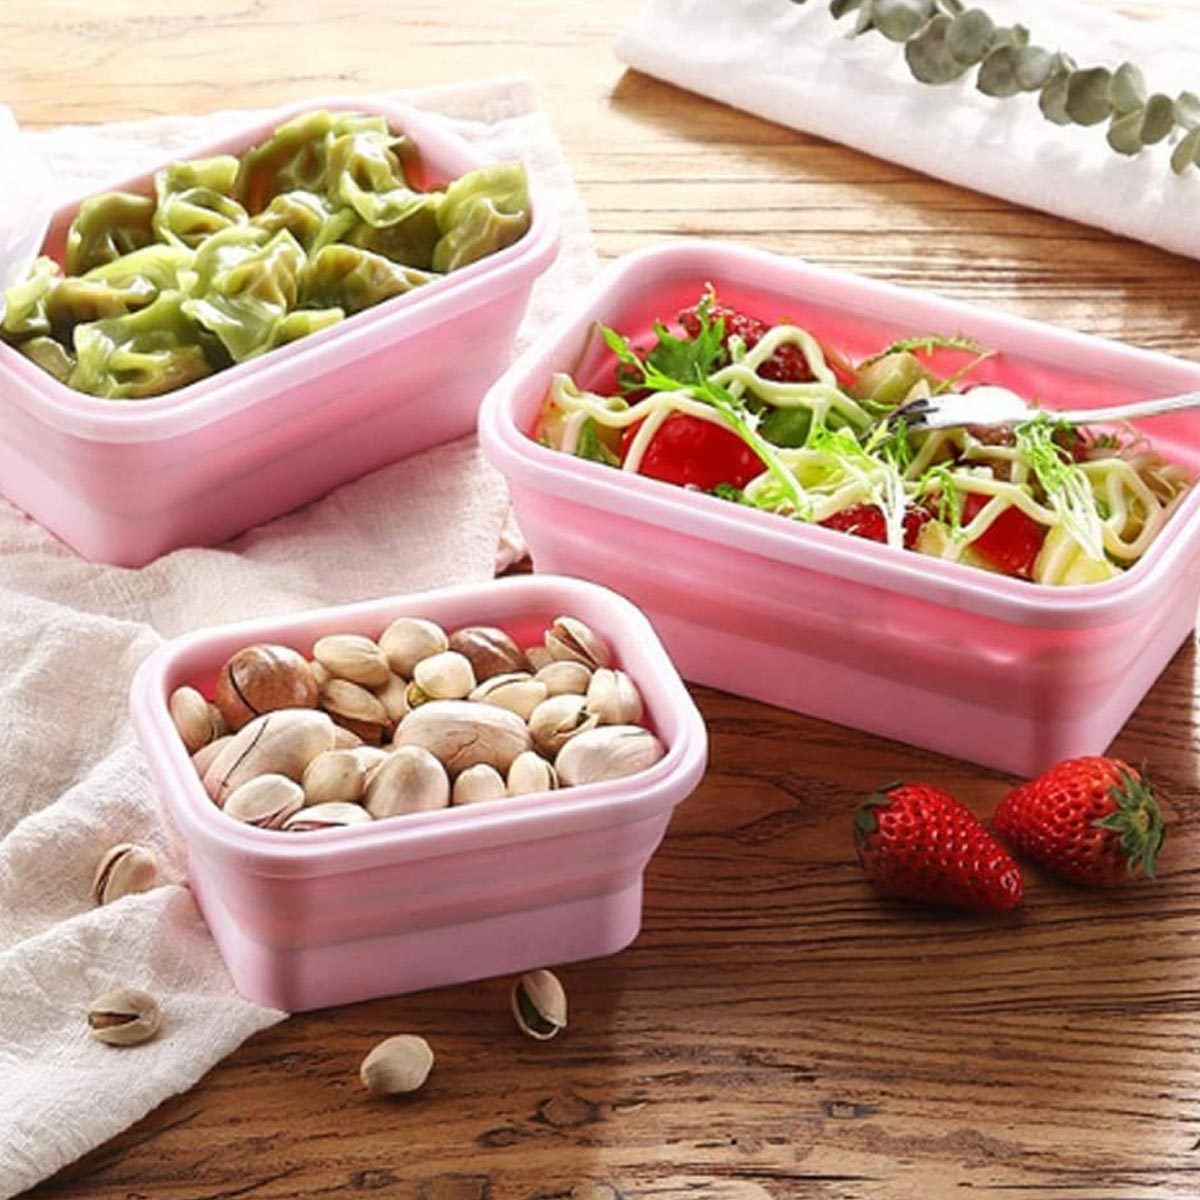 https://www.tasteofhome.com/wp-content/uploads/2021/04/Keweis-Silicone-Lunch-Box-Collapsible-Folding-Food-Storage-Container-with-Lids-Kitchen-Microwave-Freezer-and-Dishwasher-Safe-Kids_ecomm_via-amazon.com_.jpg?fit=700%2C700